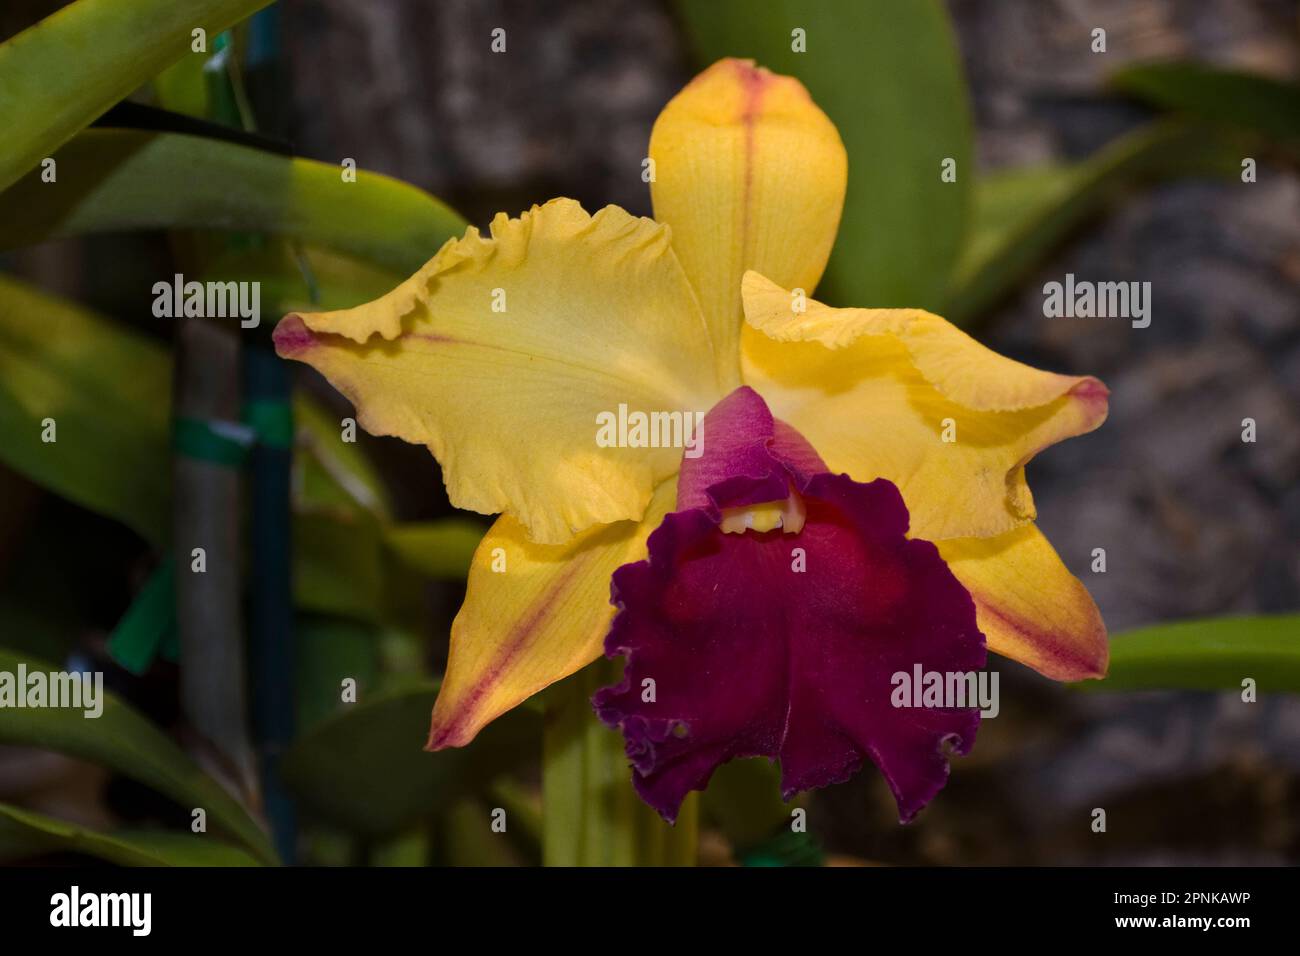 Beautiful Cattleya Orchid flower with yellow and bungundy petals and green leaves Stock Photo